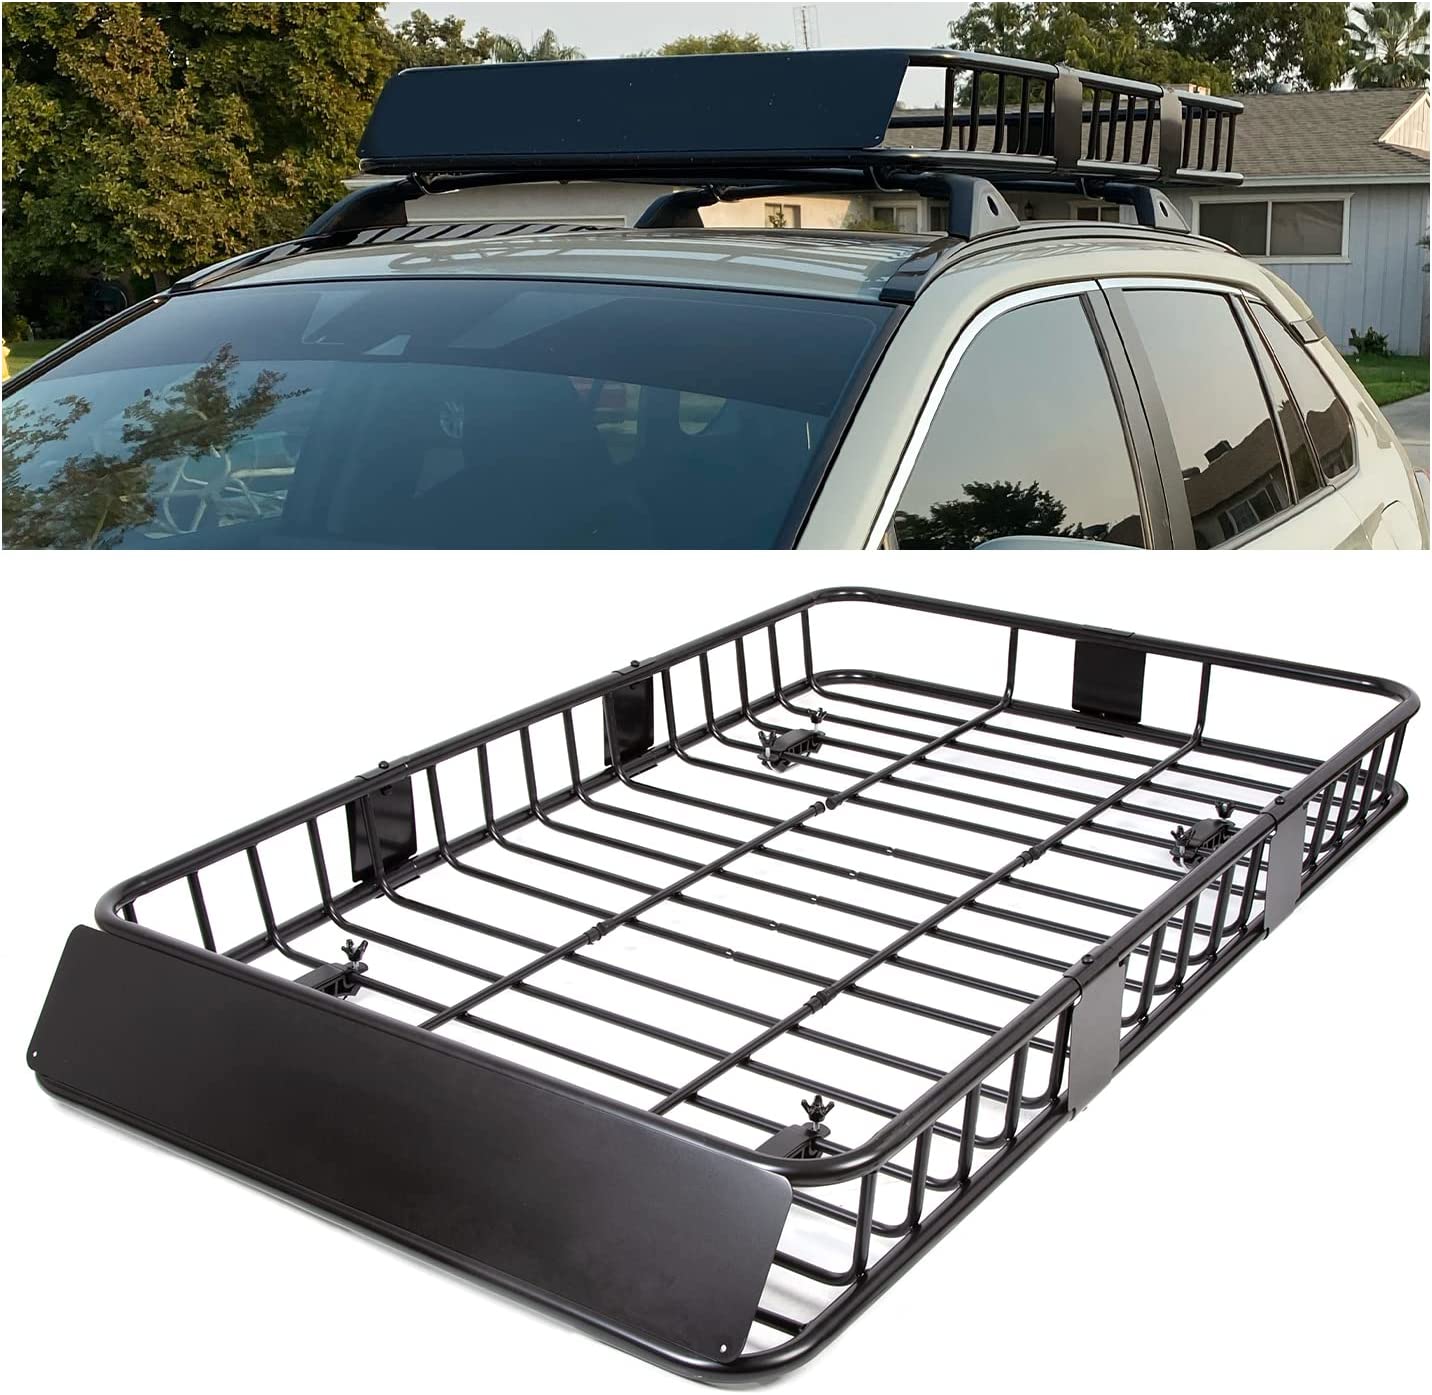 Universal Roof Rack Cargo Carrier 250LBS Weight Capacity Heavy Duty Steel Car SUV Top Luggage Storage Holder Basket for Travel